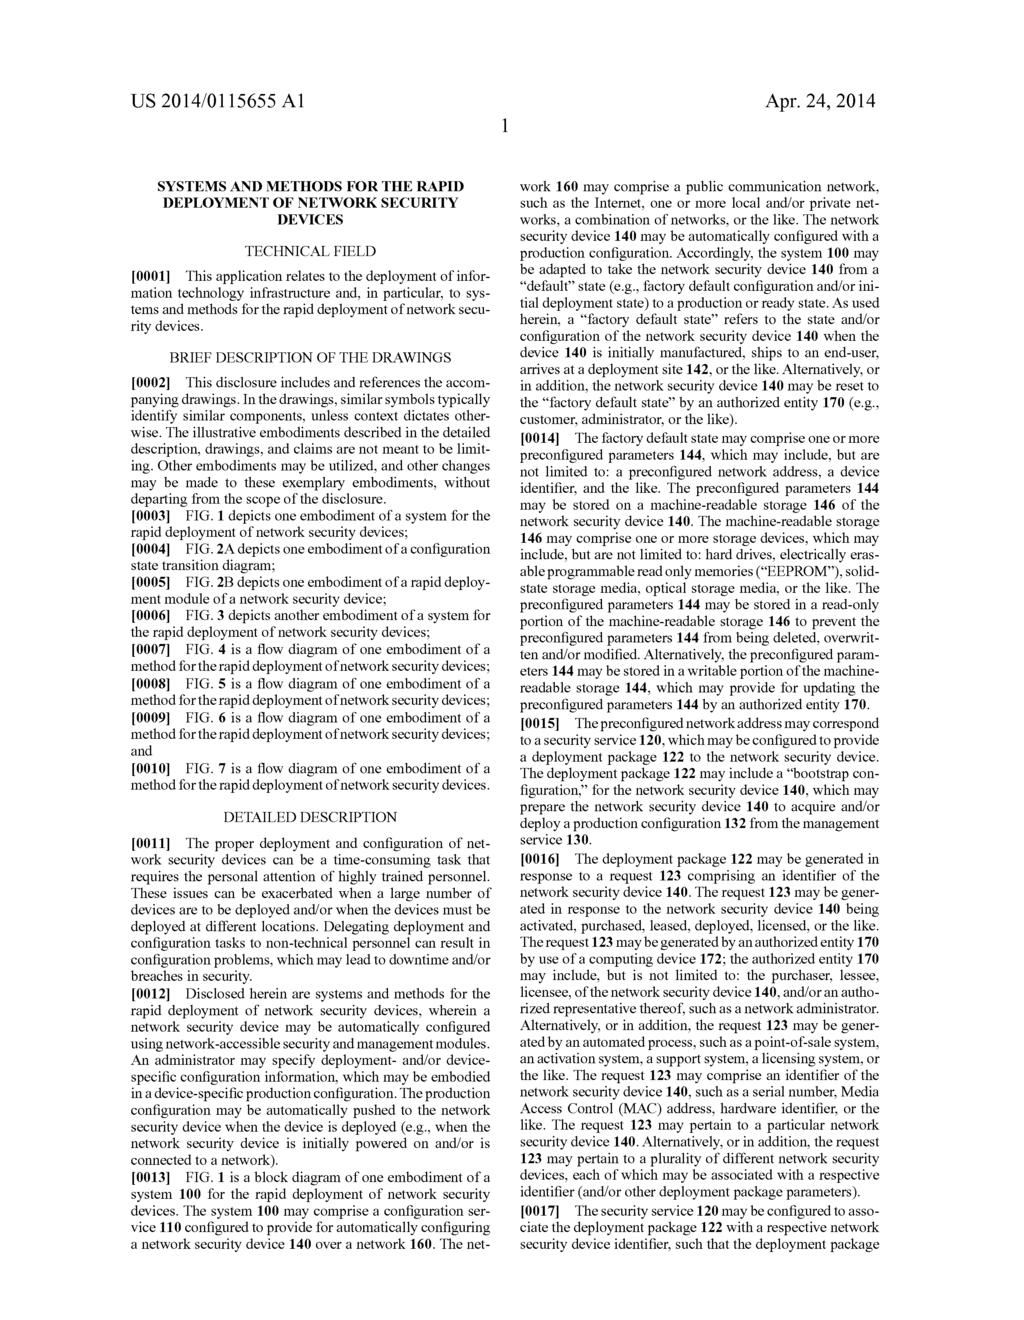 US 2014/01 15655 A1 SYSTEMIS AND METHODS FOR THE RAPID DEPLOYMENT OF NETWORKSECURITY DEVICES TECHNICAL FIELD 0001.